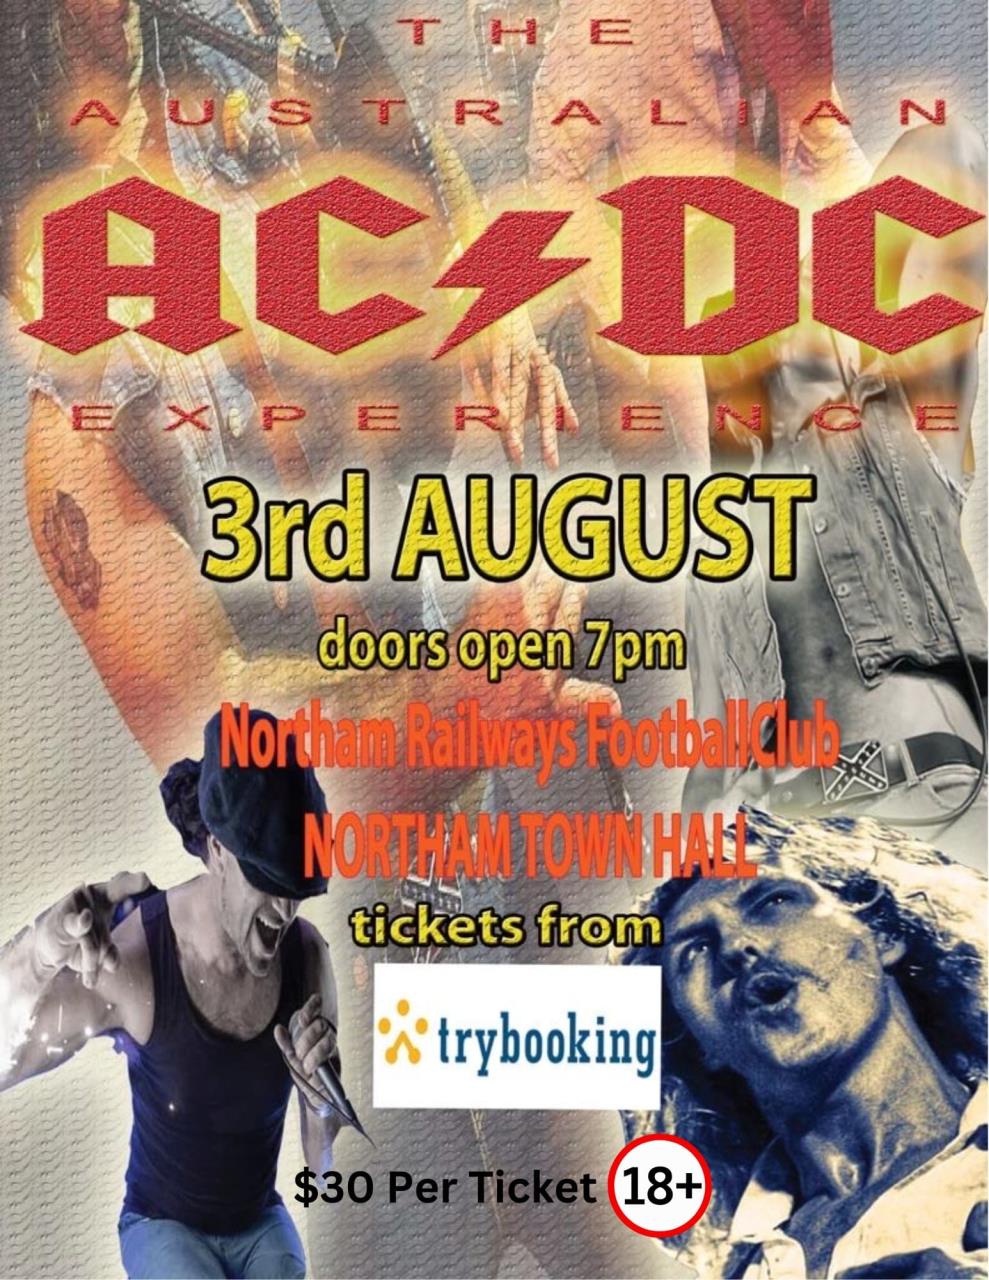 ACDC Tribute Band Coming To Northam